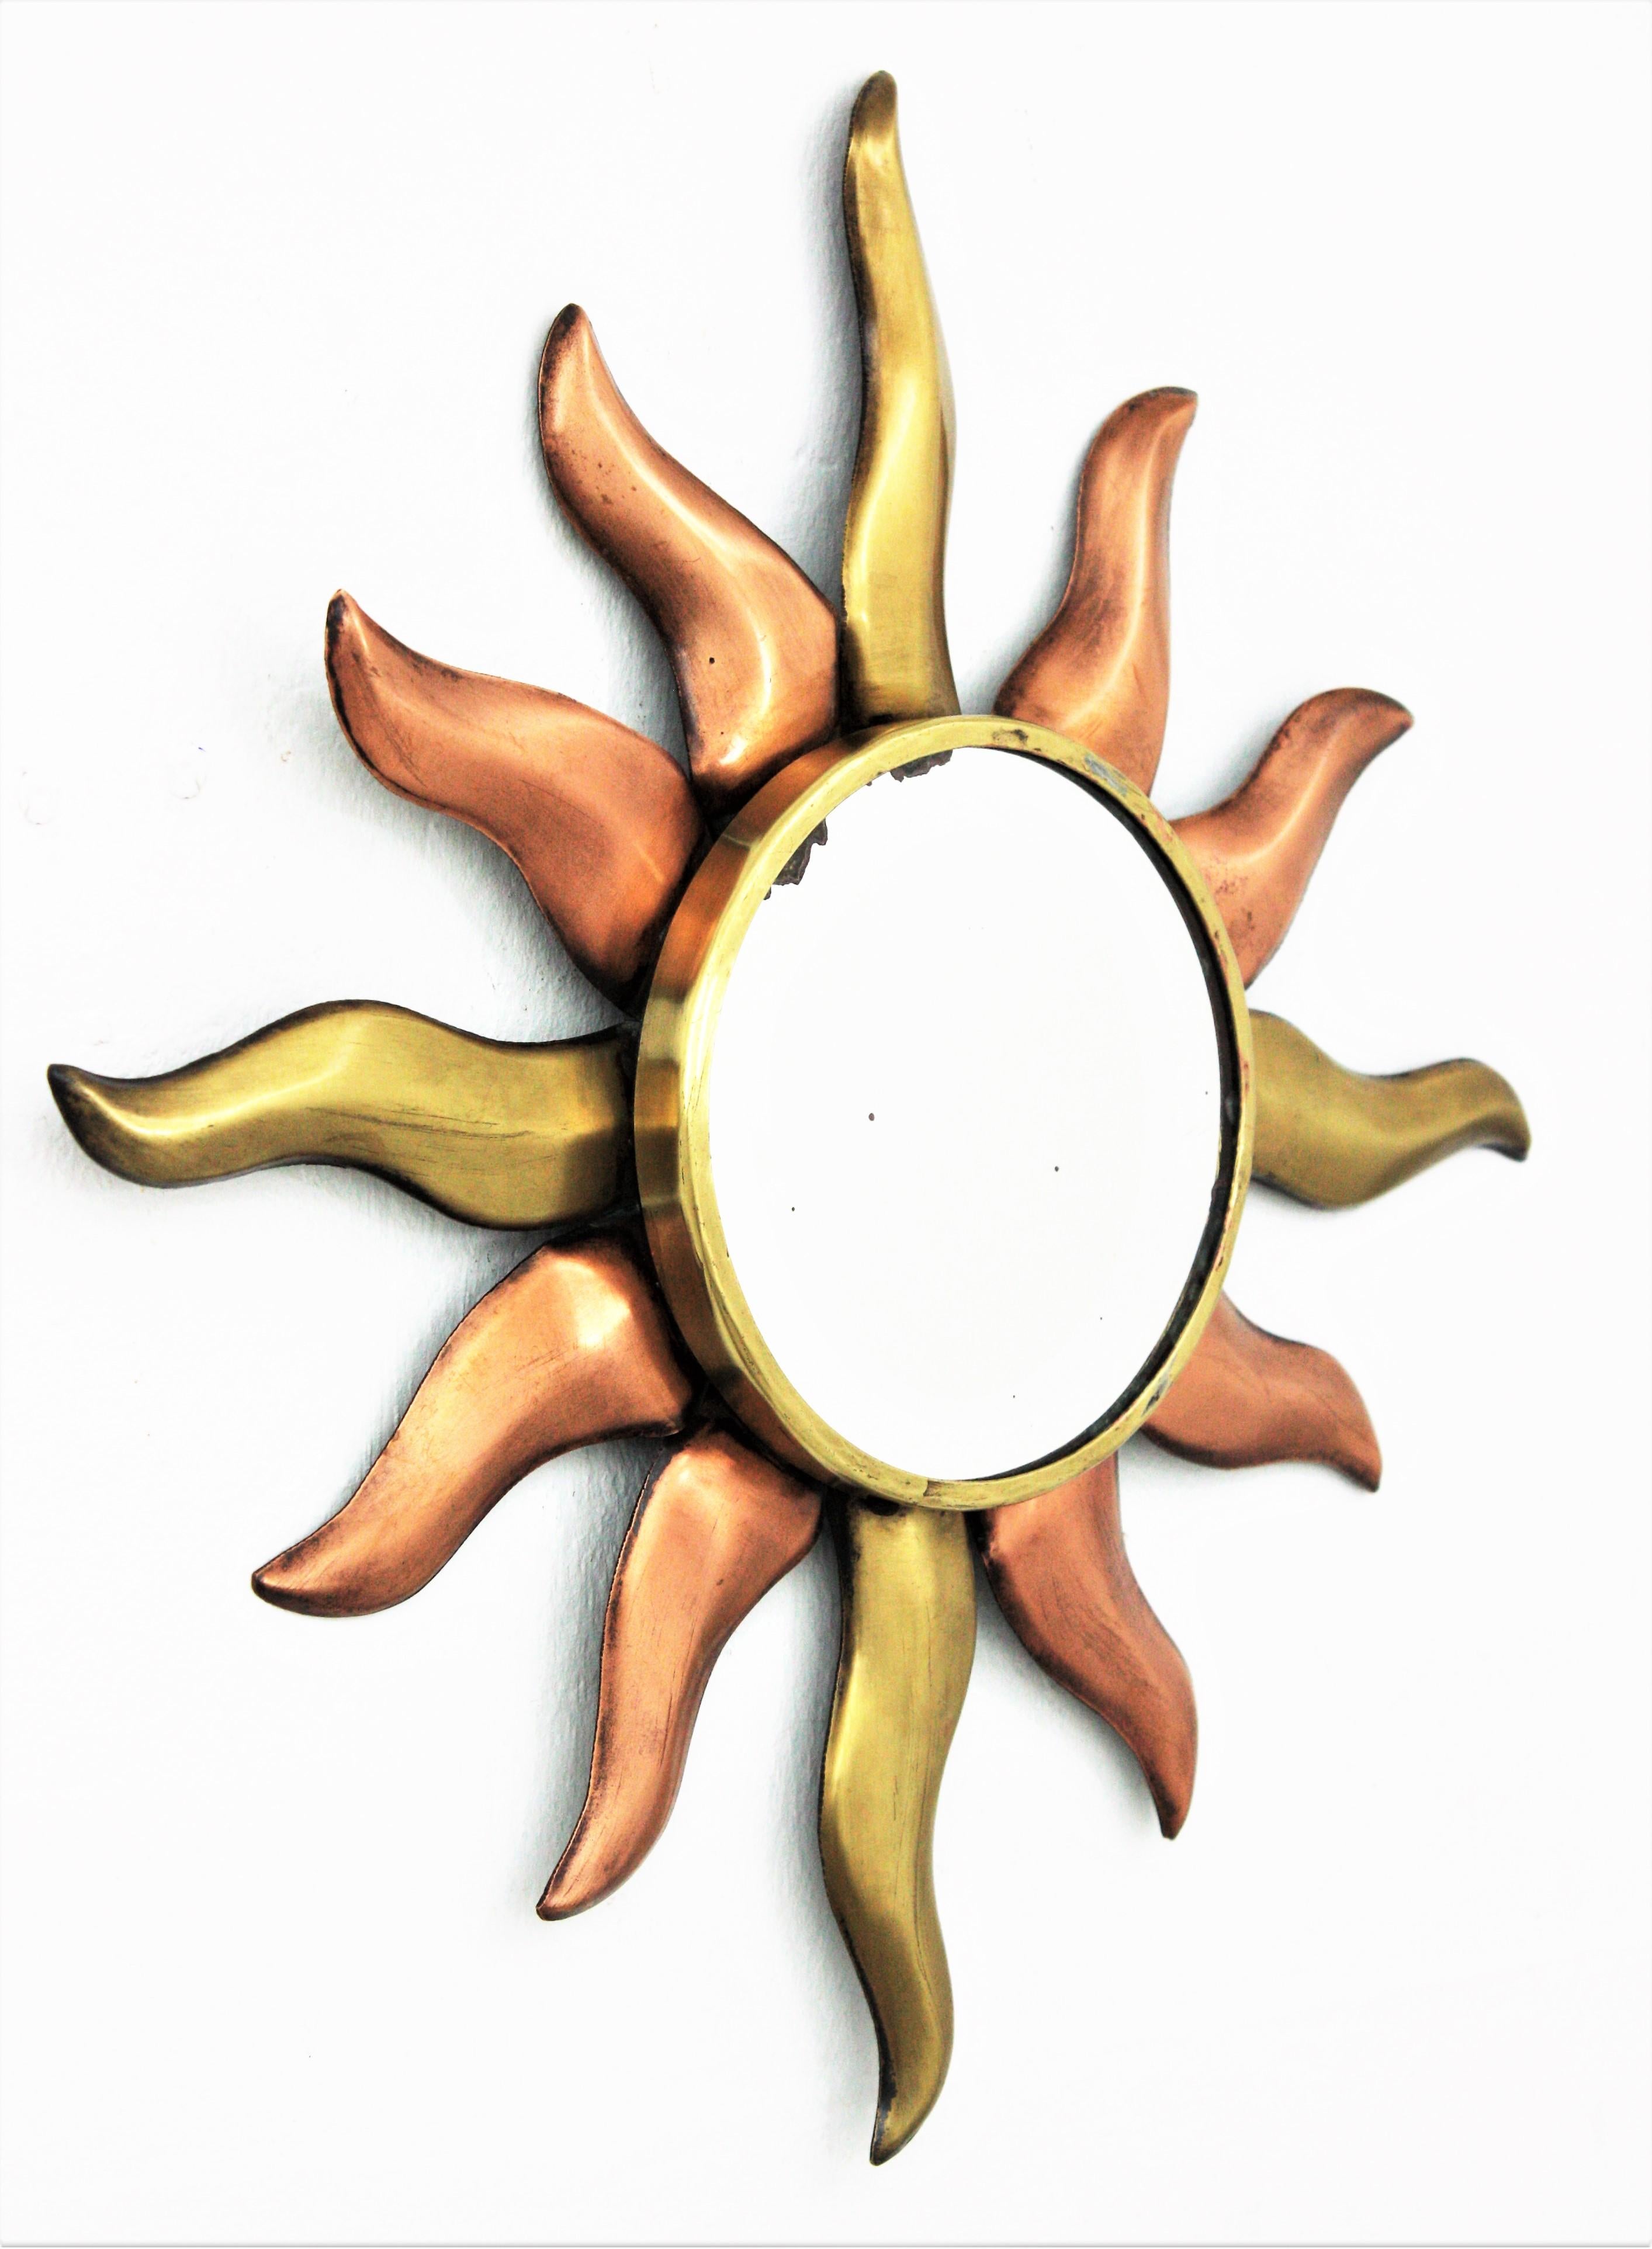 Handcrafted copper and brass small sunburst mirror. France, 1930s.
This lovely mirror features a sunburst with alternating copper and brass rays in two sizes.
Eye-catching placed alone or as a part of a sunburst wall composition.
Measures: 35 cm